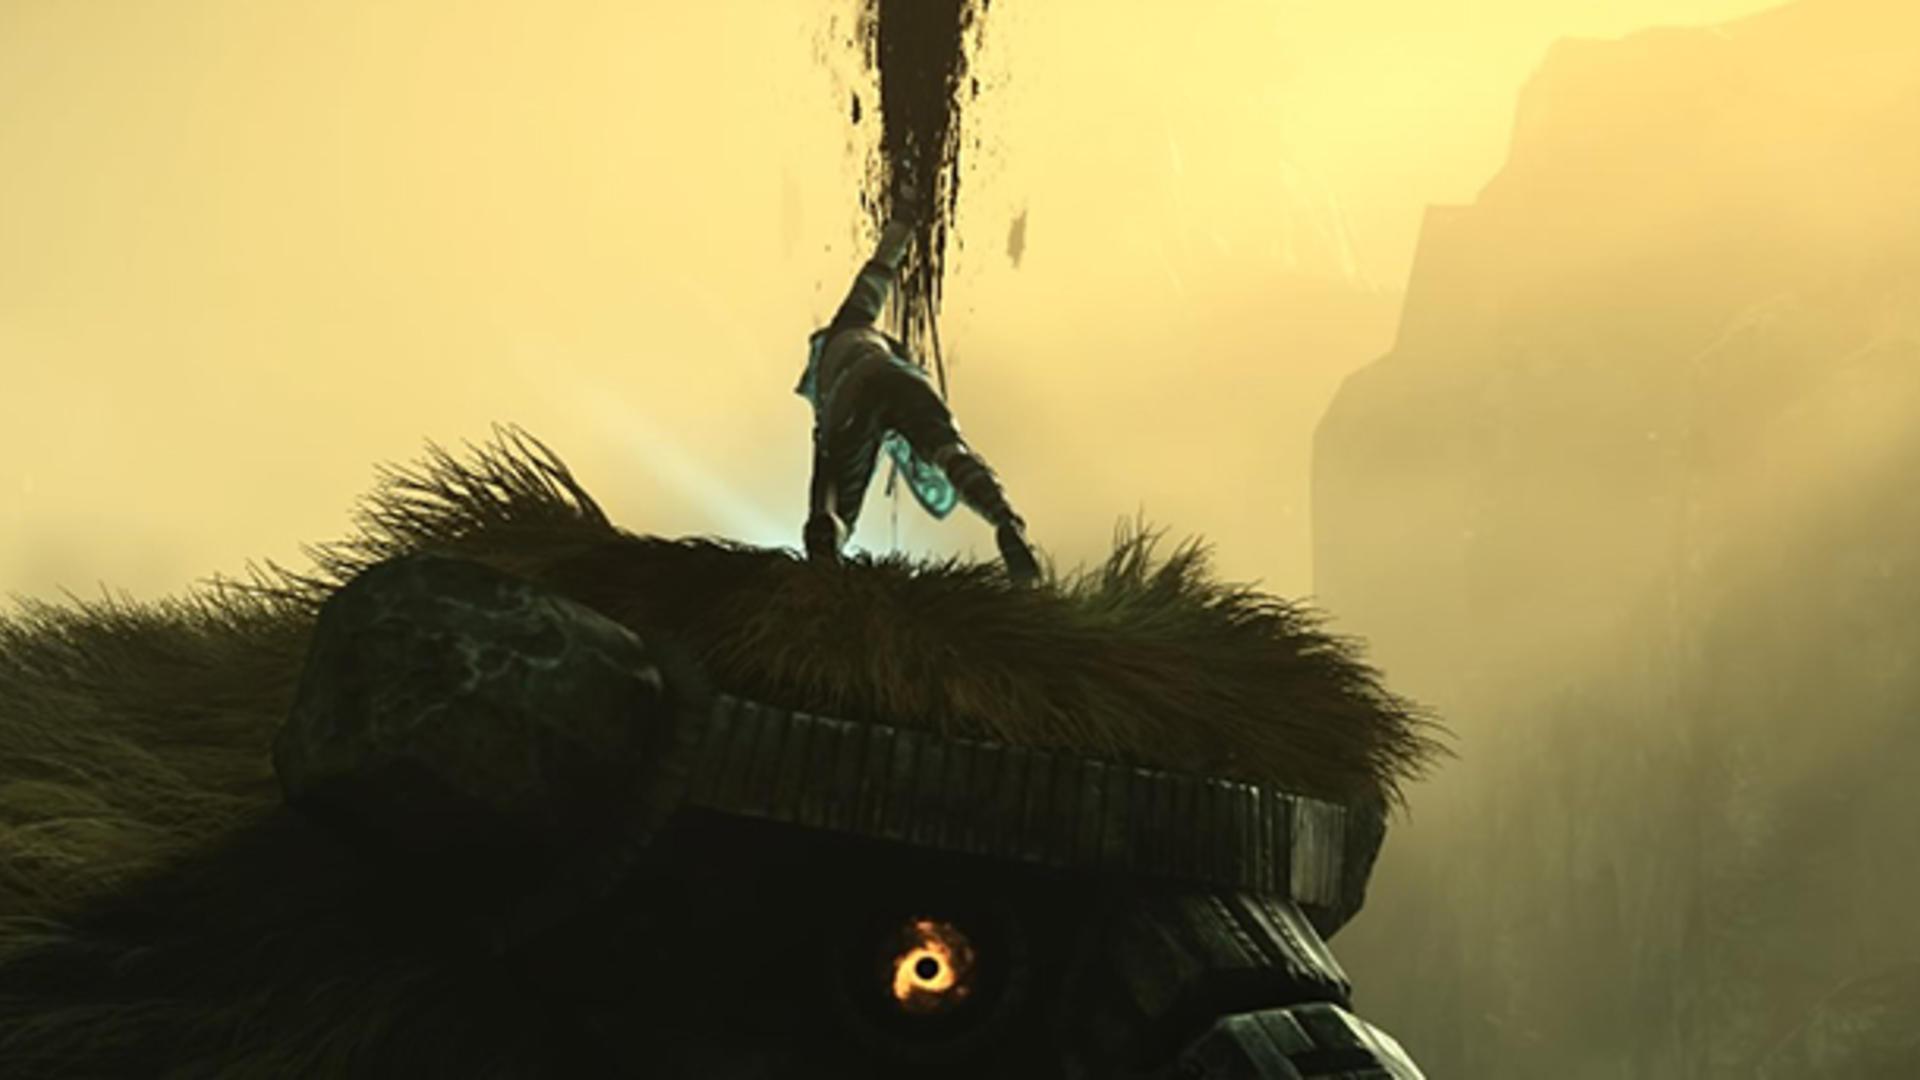 Shadow of the Colossus' Remake on PS4 Loses the Magic in its Quest